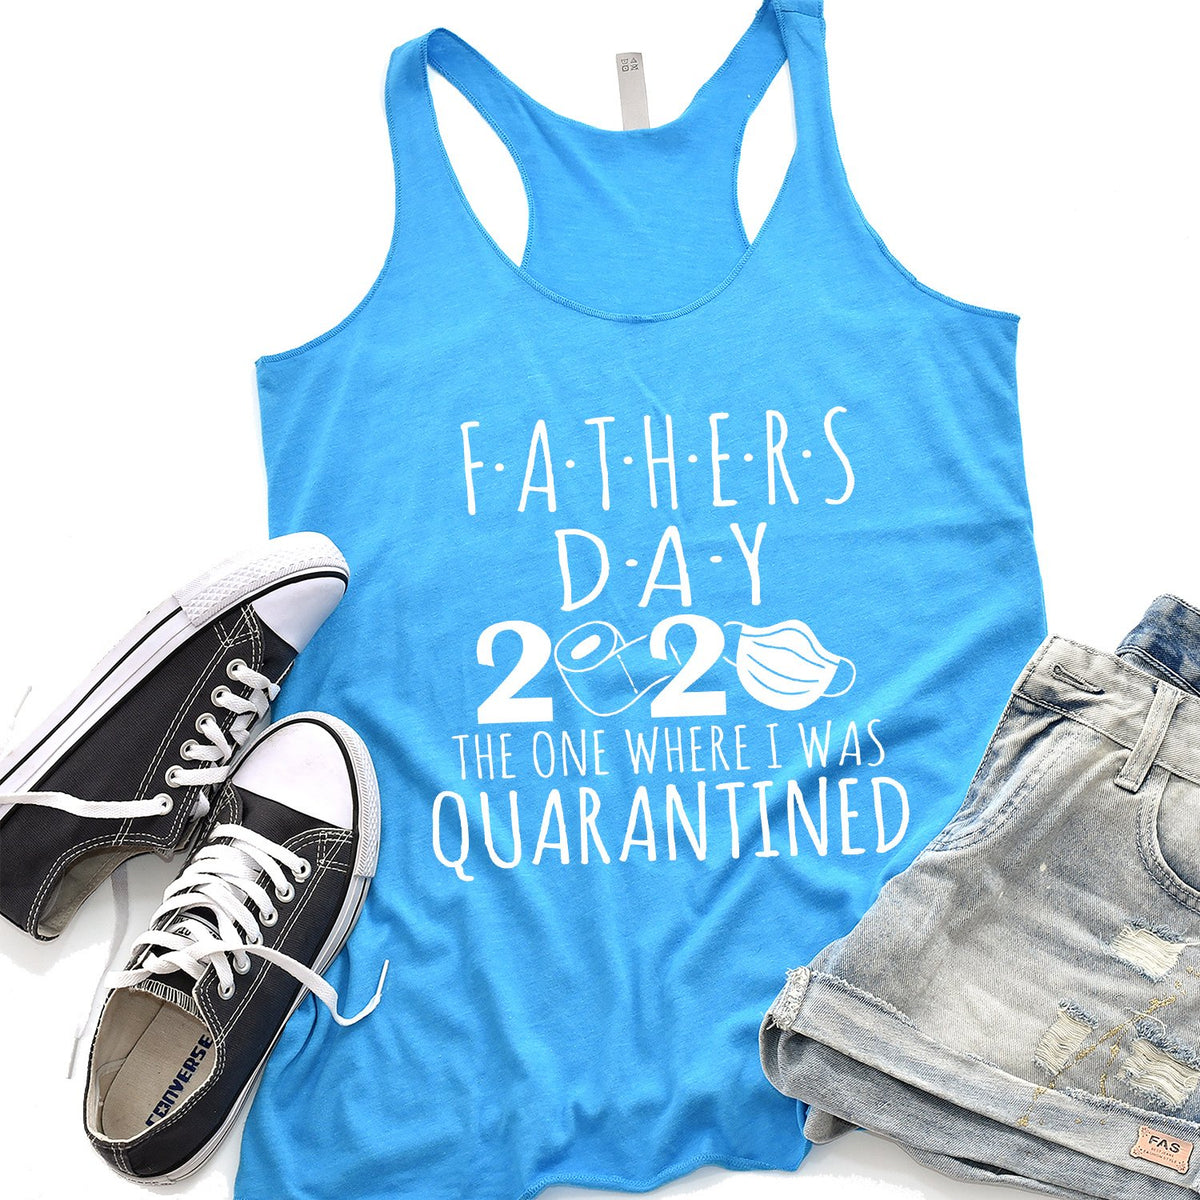 Fathers Day 2020 The One Where I Was Quarantined - Tank Top Racerback